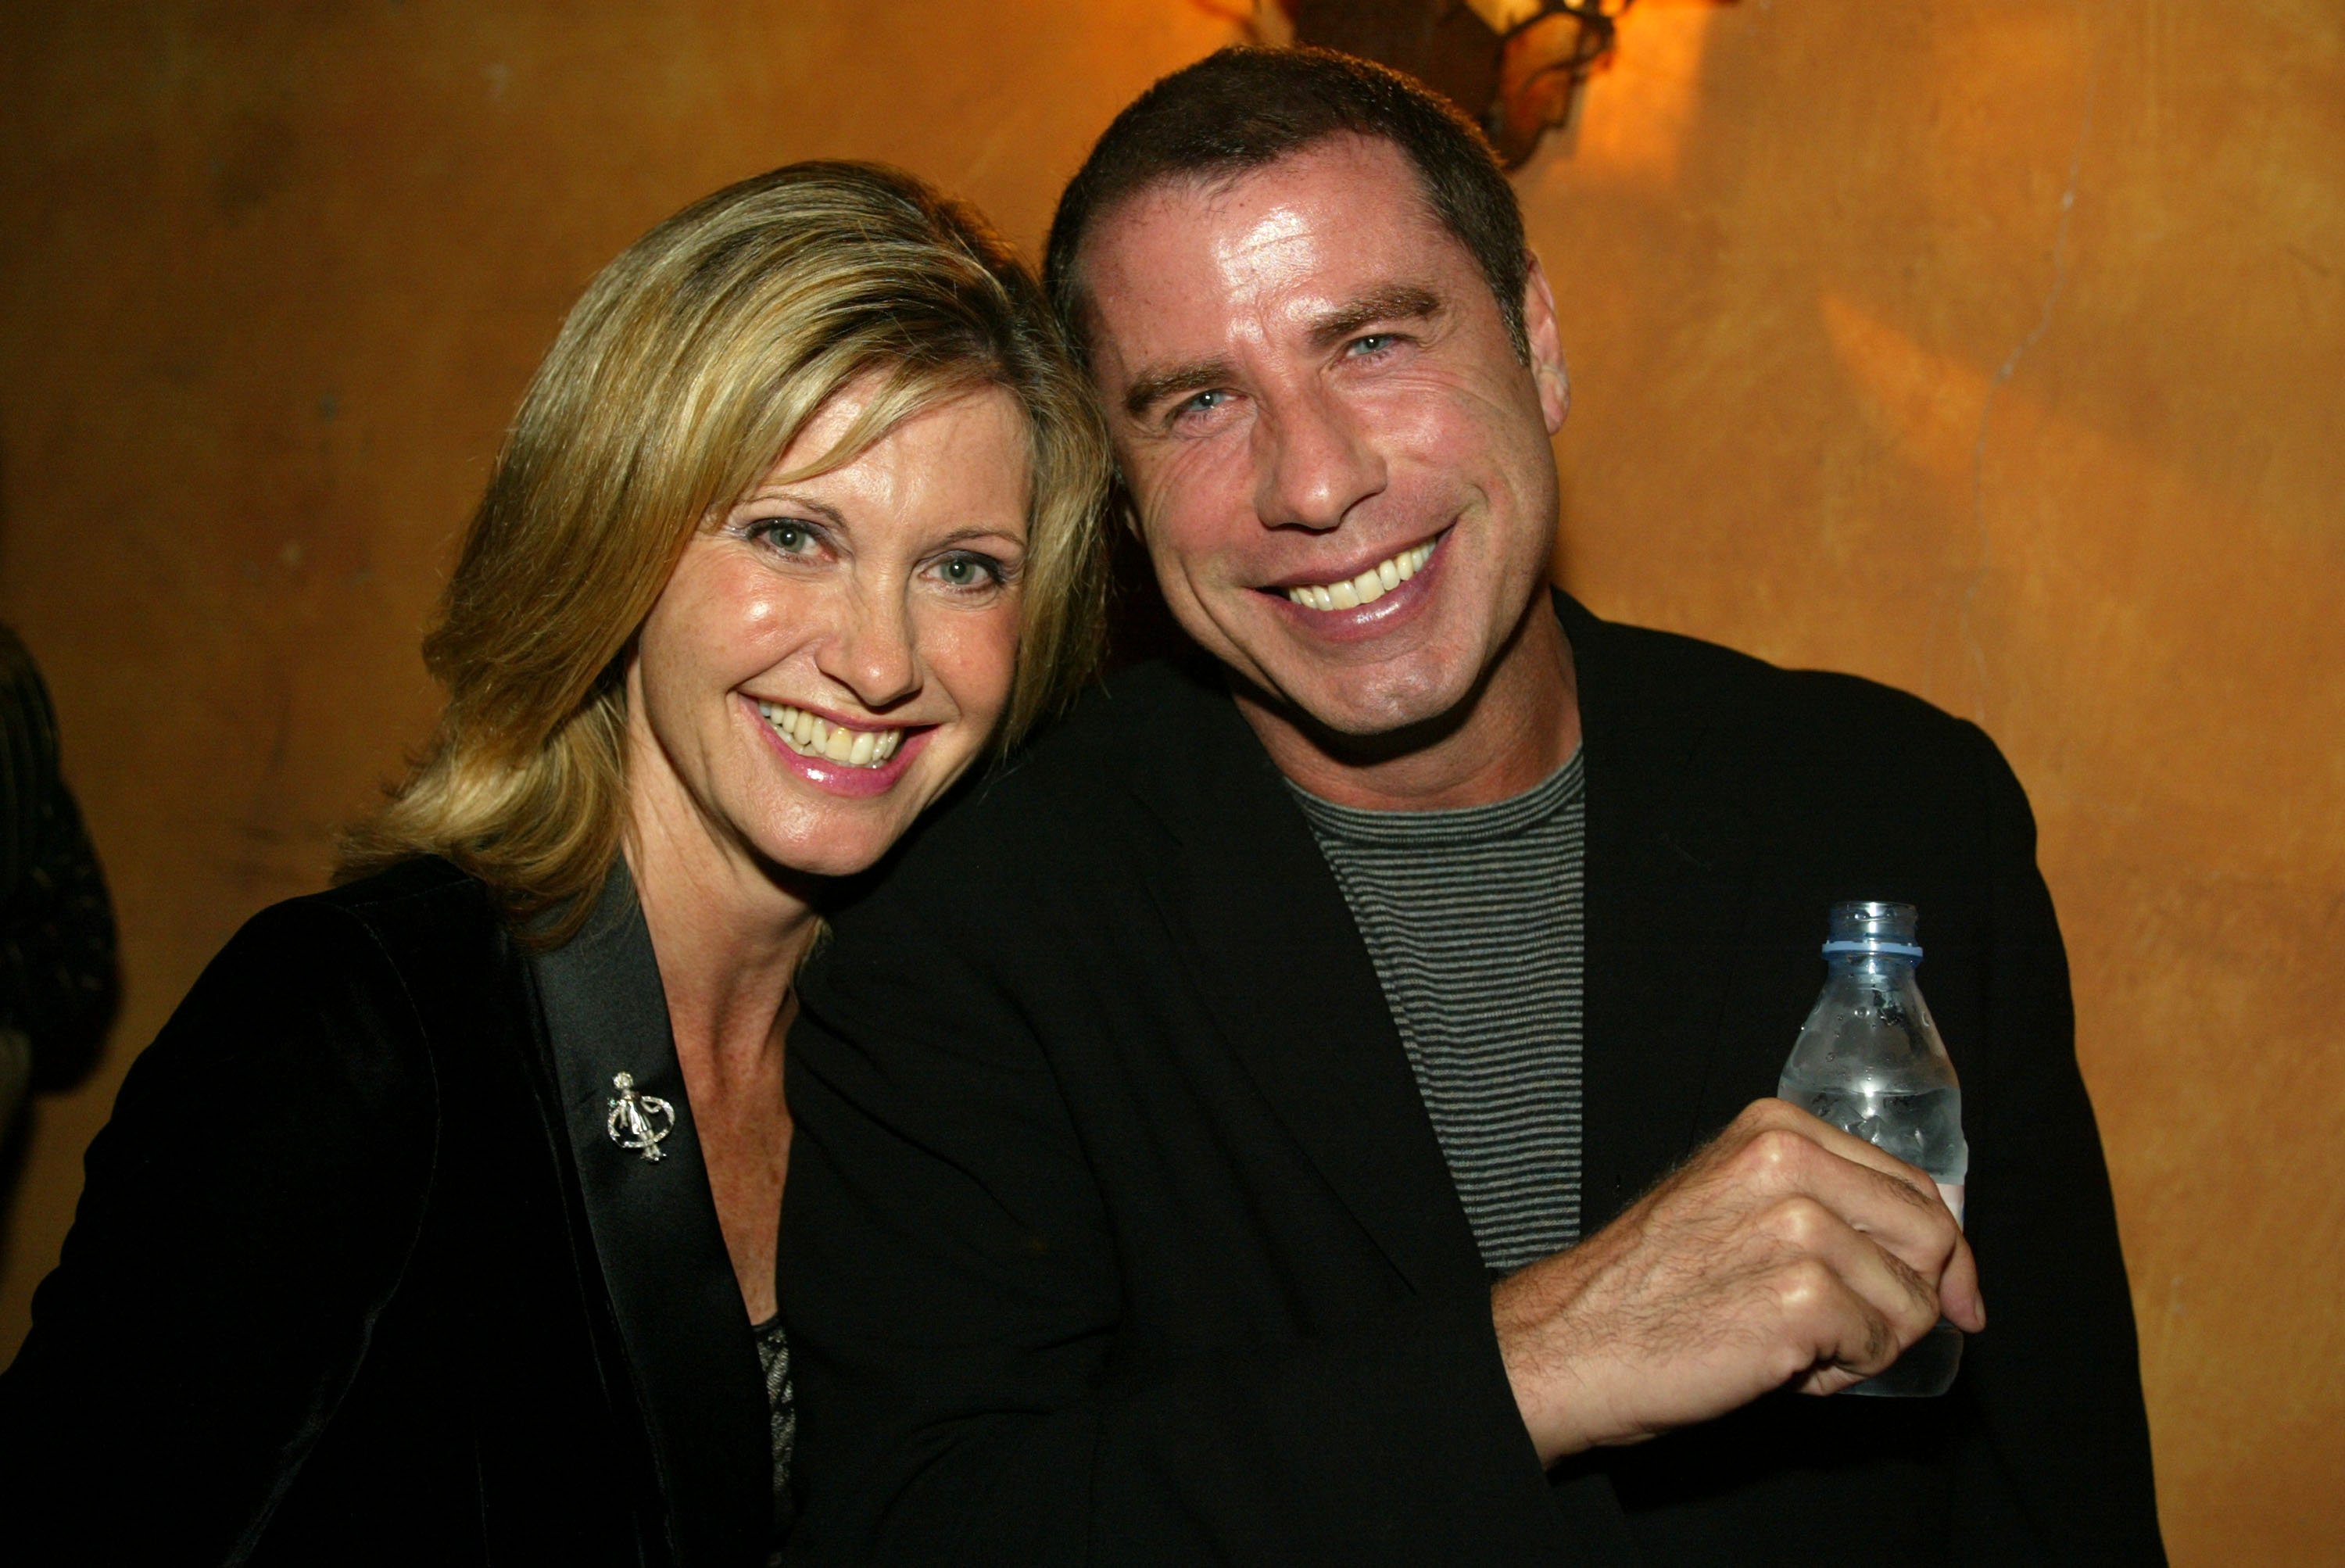 Olivia Newton-John and John Travolta at "One World, One Child Benefit Concert" for the Children's Health Environmental Coalition (CHEC) honoring Meryl Streep, Nell Newman, and Dr. Lawrie Mott at the home of Cindra and Alan Ladd in Beverly Hills, on Thursday, October 10, 2002. | Source: Getty Images